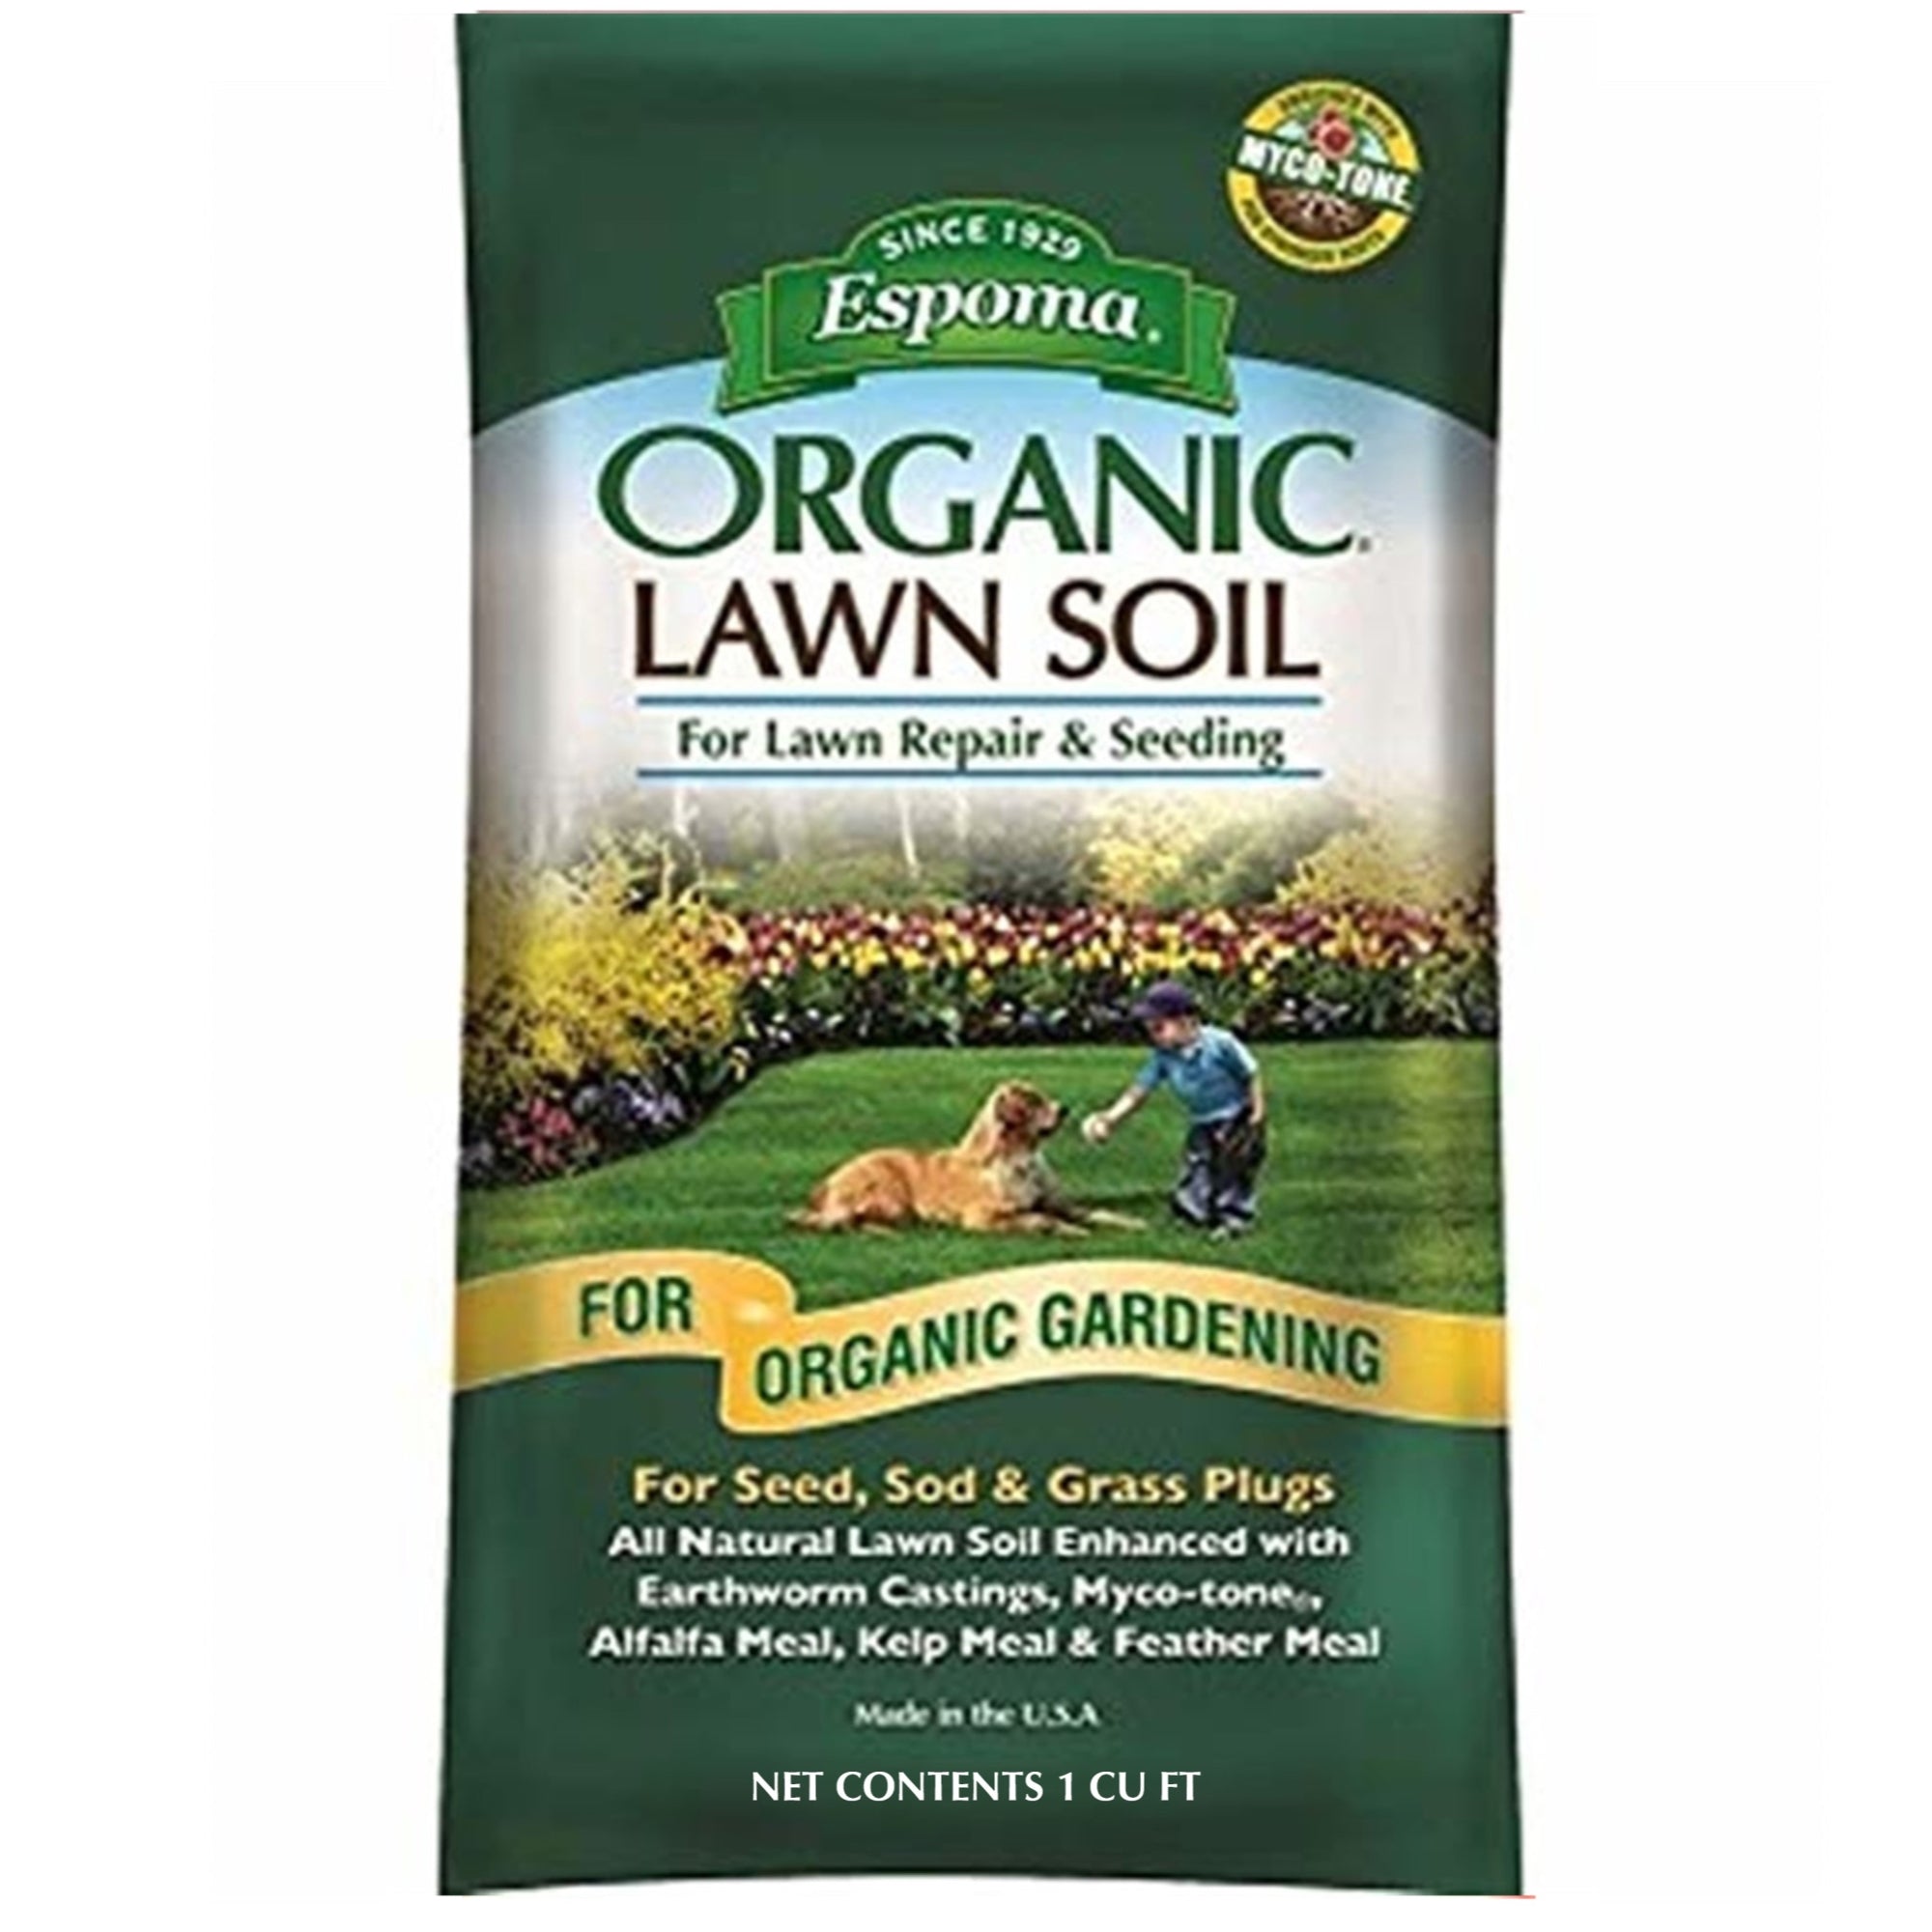 Espoma Organic Lawn Soil for Repair & Seeding, All-Natural Lawn Soil Enhanced with Earthworm Castings, Myco-tone, Alfalfa Meal, Kelp Meal and Feather Meal, 1 CF Bag